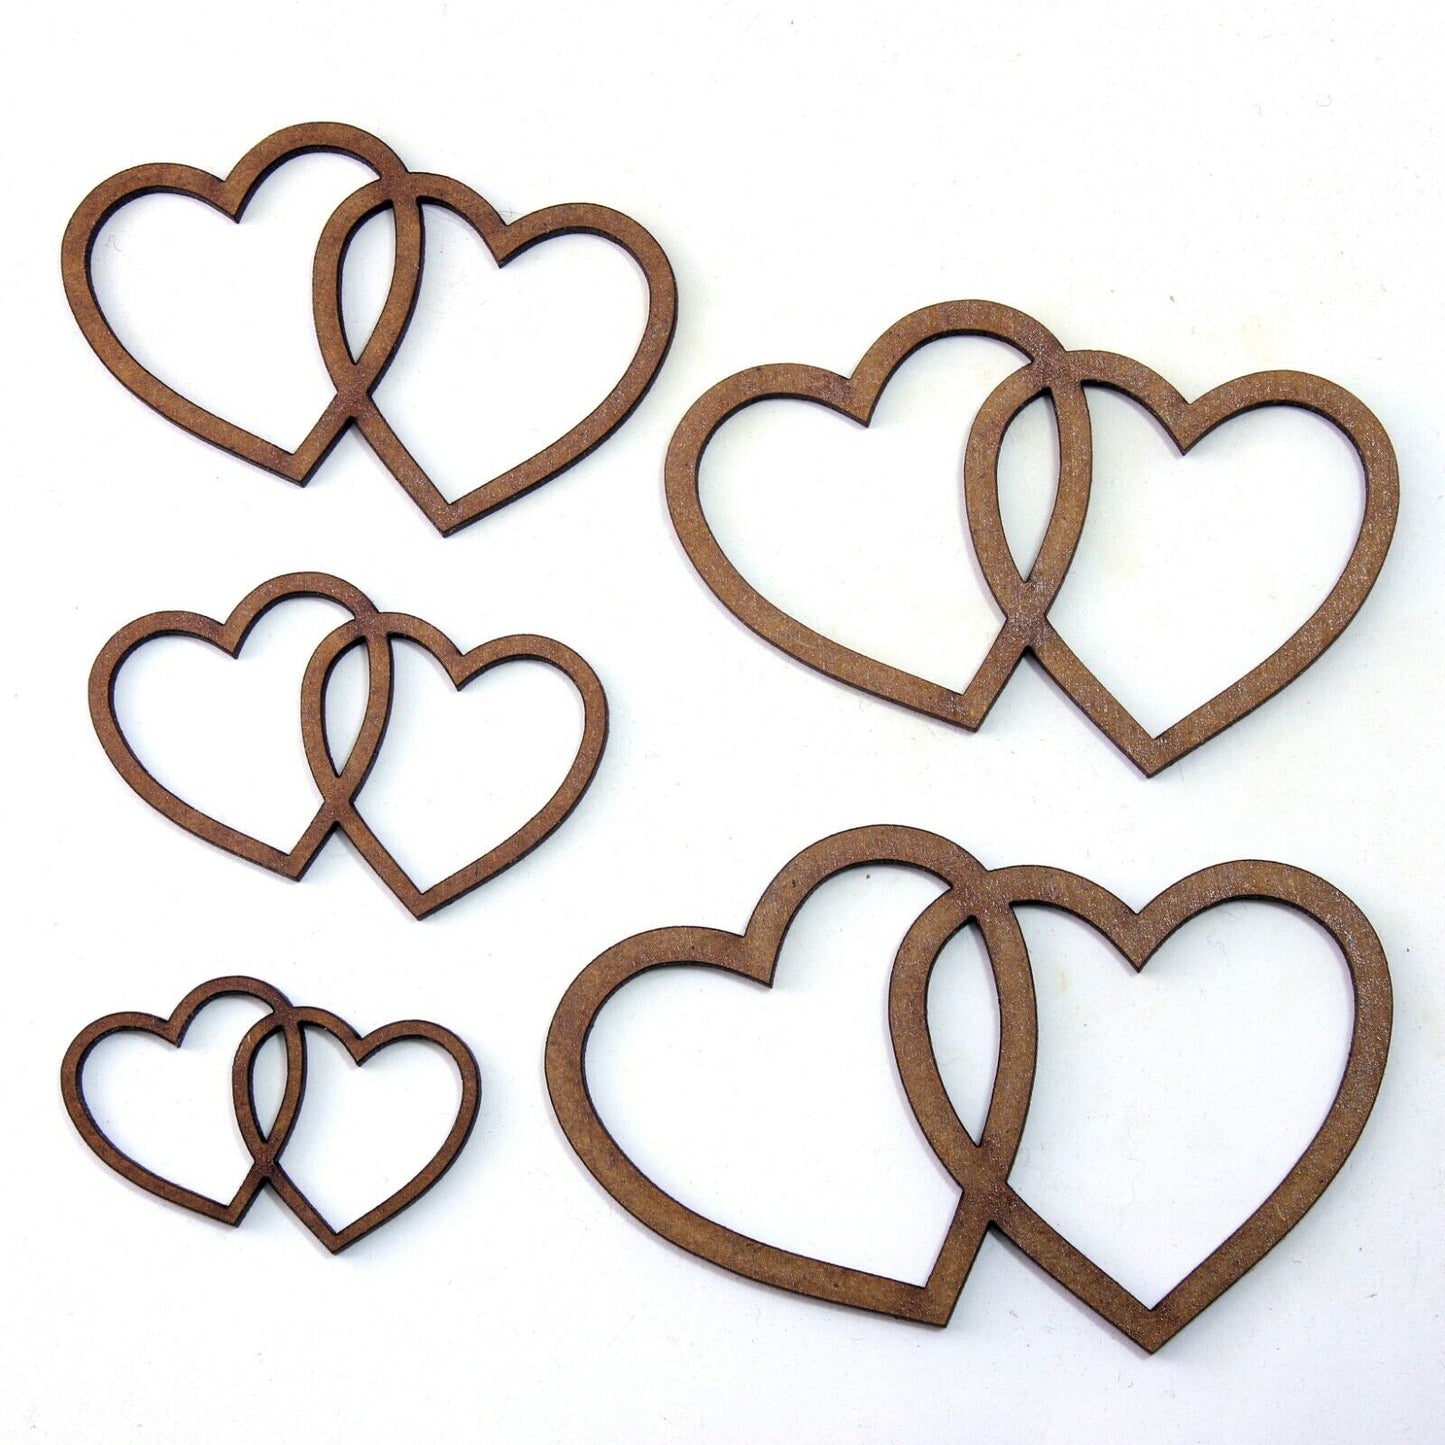 Joined Hollow Hearts Craft Shape, Various Sizes, 2mm MDF Wood. Valentine, Love